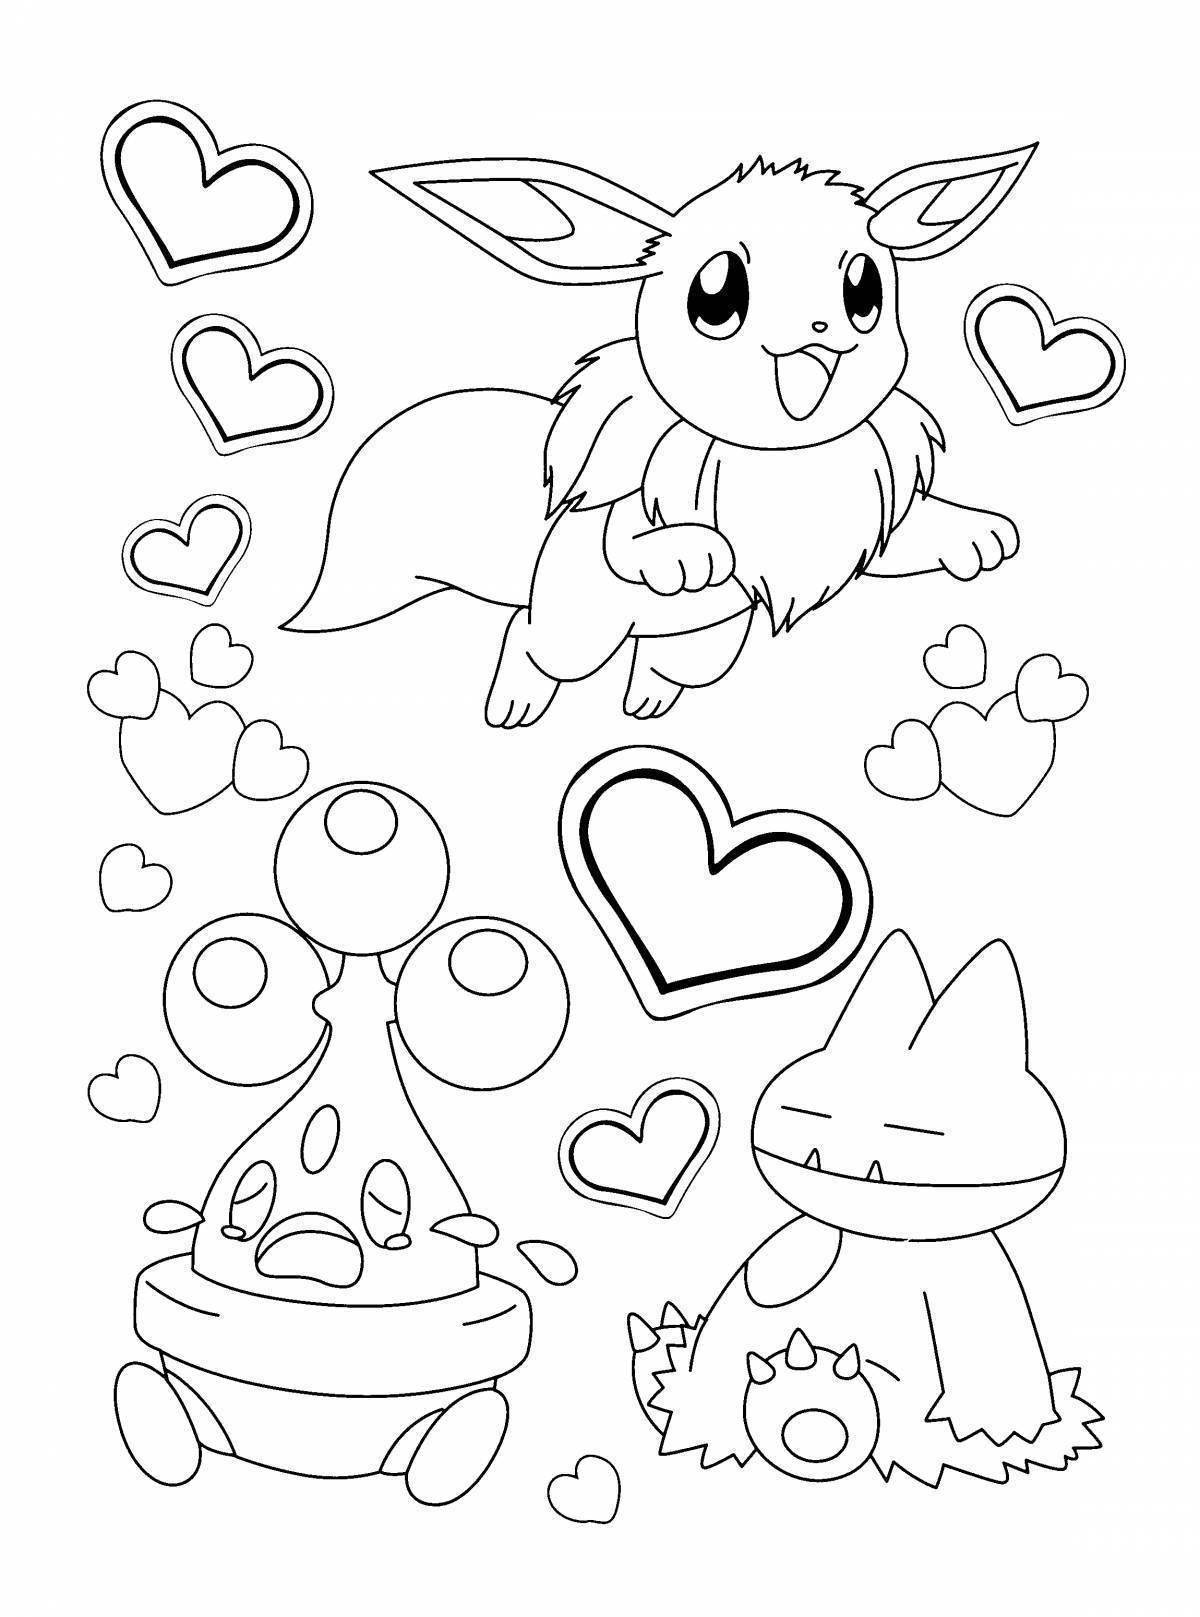 Funny pikachu coloring pages for girls